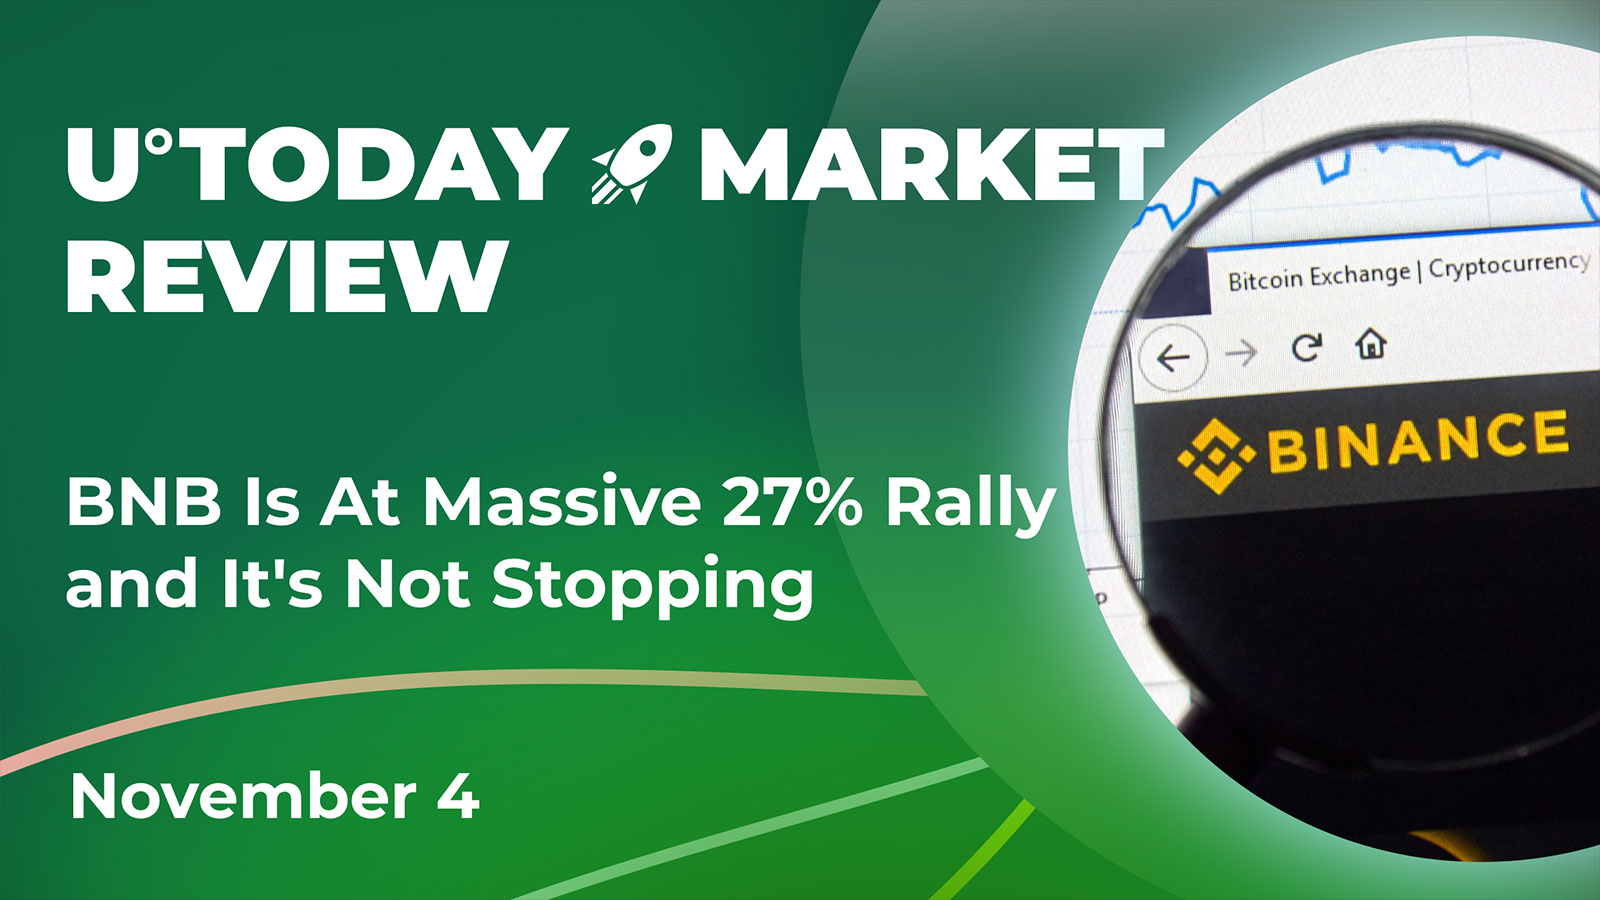 BNB Is At Massive 27% Rally and It's Not Stopping: Crypto Market Review, November 4